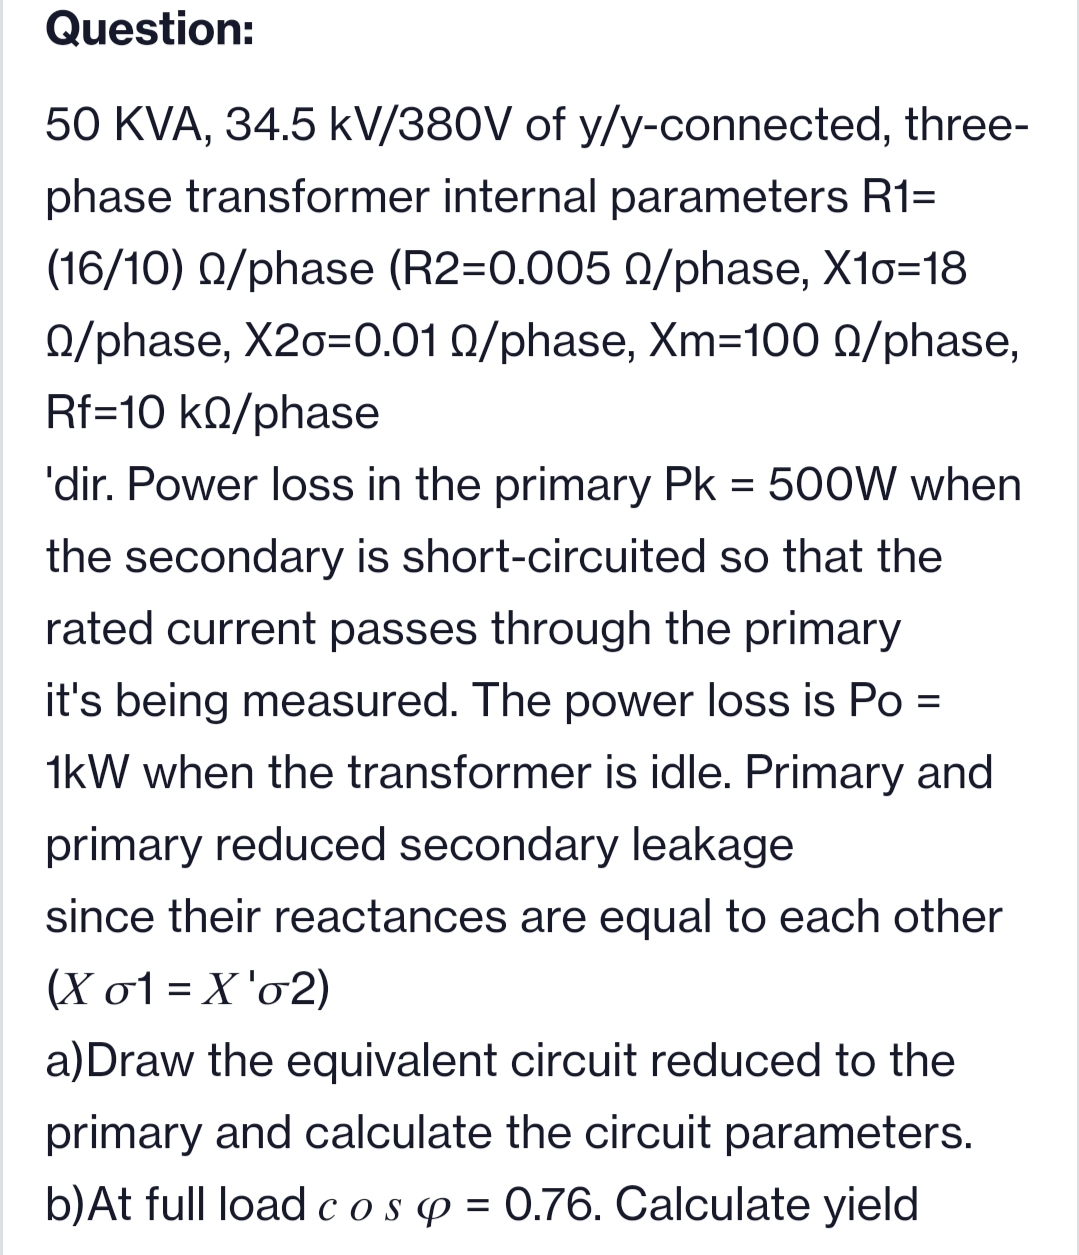 Question:
50 KVA, 34.5 kV/380V of y/y-connected, three-
phase transformer internal parameters R1=
(16/10) Q/phase (R2=0.005 0/phase, X10=18
0/phase, X2o=0.01 0/phase, Xm=100 0/phase,
Rf=10 kQ/phase
'dir. Power loss in the primary Pk = 500W when
%3D
the secondary is short-circuited so that the
rated current passes through the primary
it's being measured. The power loss is Po =
1kW when the transformer is idle. Primary and
primary reduced secondary leakage
since their reactances are equal to each other
(X o1 = X 'o2)
a)Draw the equivalent circuit reduced to the
primary and calculate the circuit parameters.
b)At full load cosp = 0.76. Calculate yield
%3D
